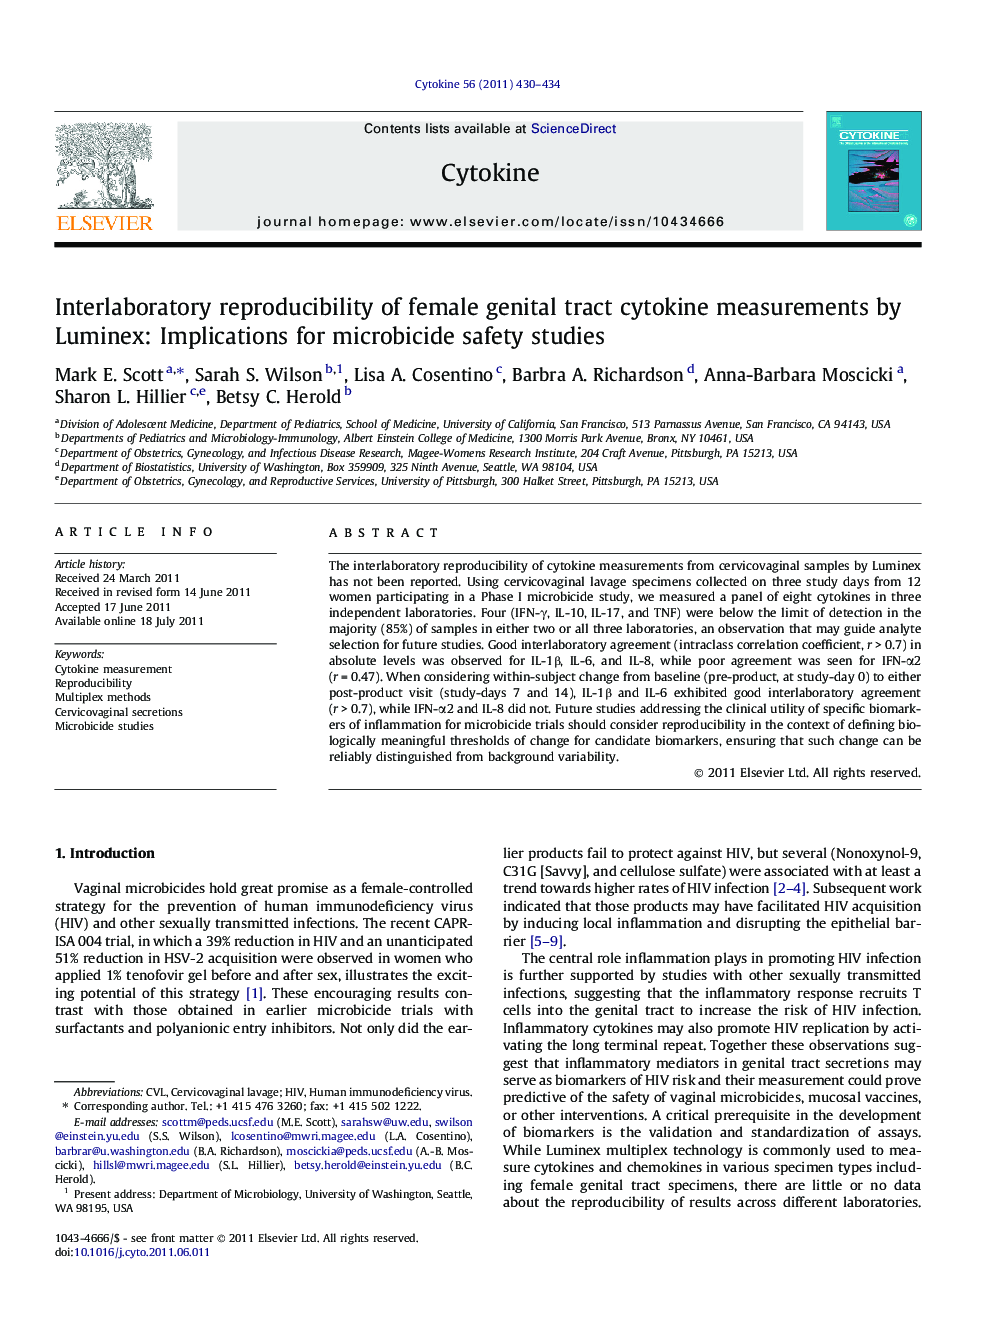 Interlaboratory reproducibility of female genital tract cytokine measurements by Luminex: Implications for microbicide safety studies